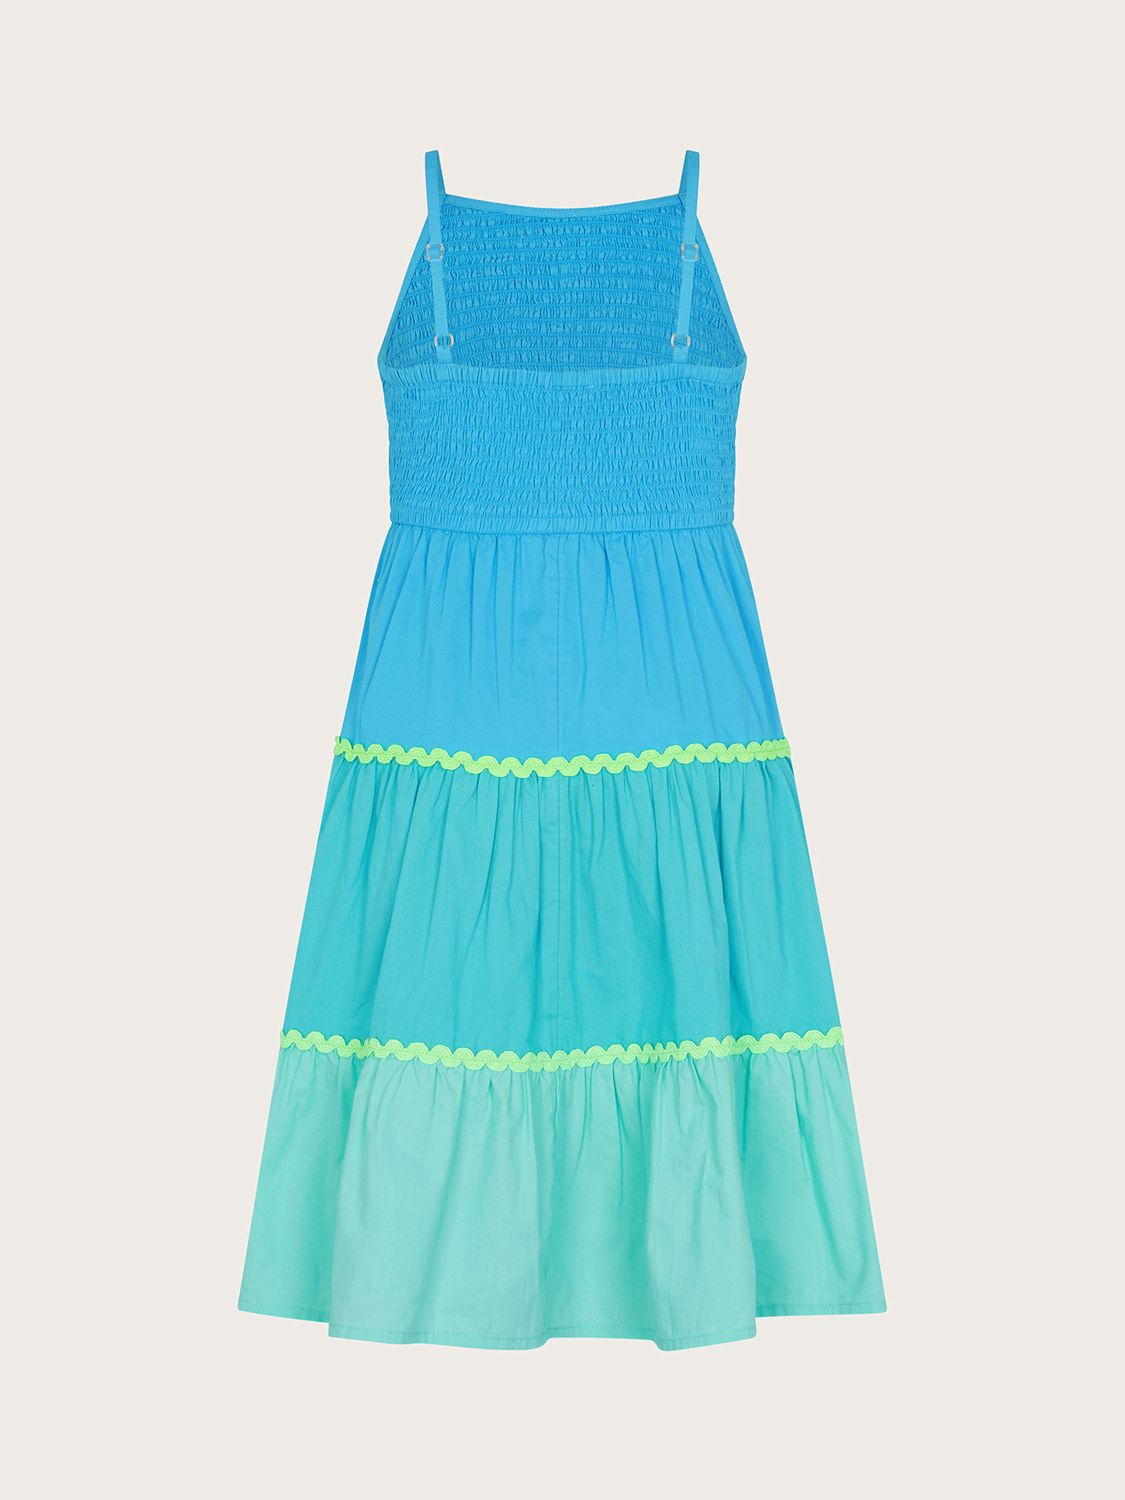 Buy Monsoon Kids' Ruched Colour Block Tiered Dress, Blue Online at johnlewis.com